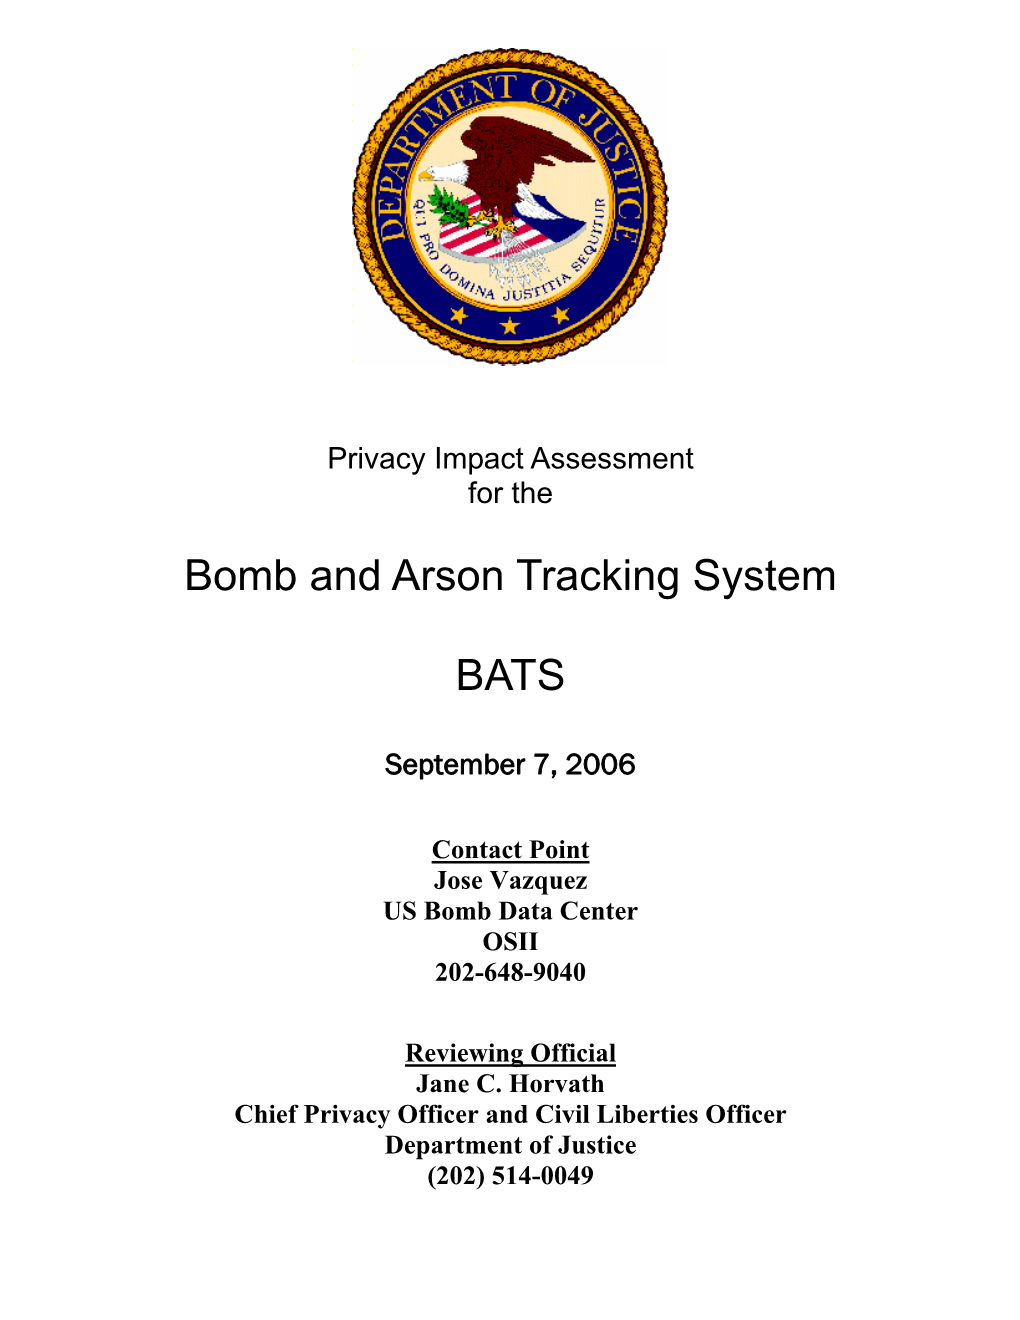 Bomb and Arson Tracking System BATS